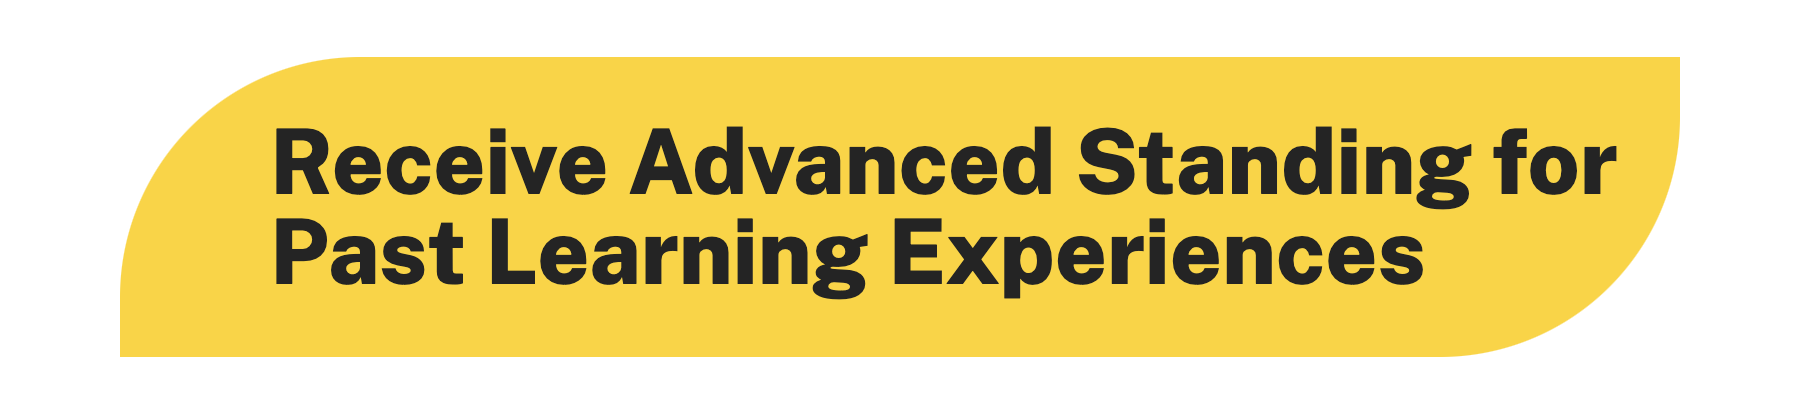 Receive Advanced Standing for Past Learning Experiences